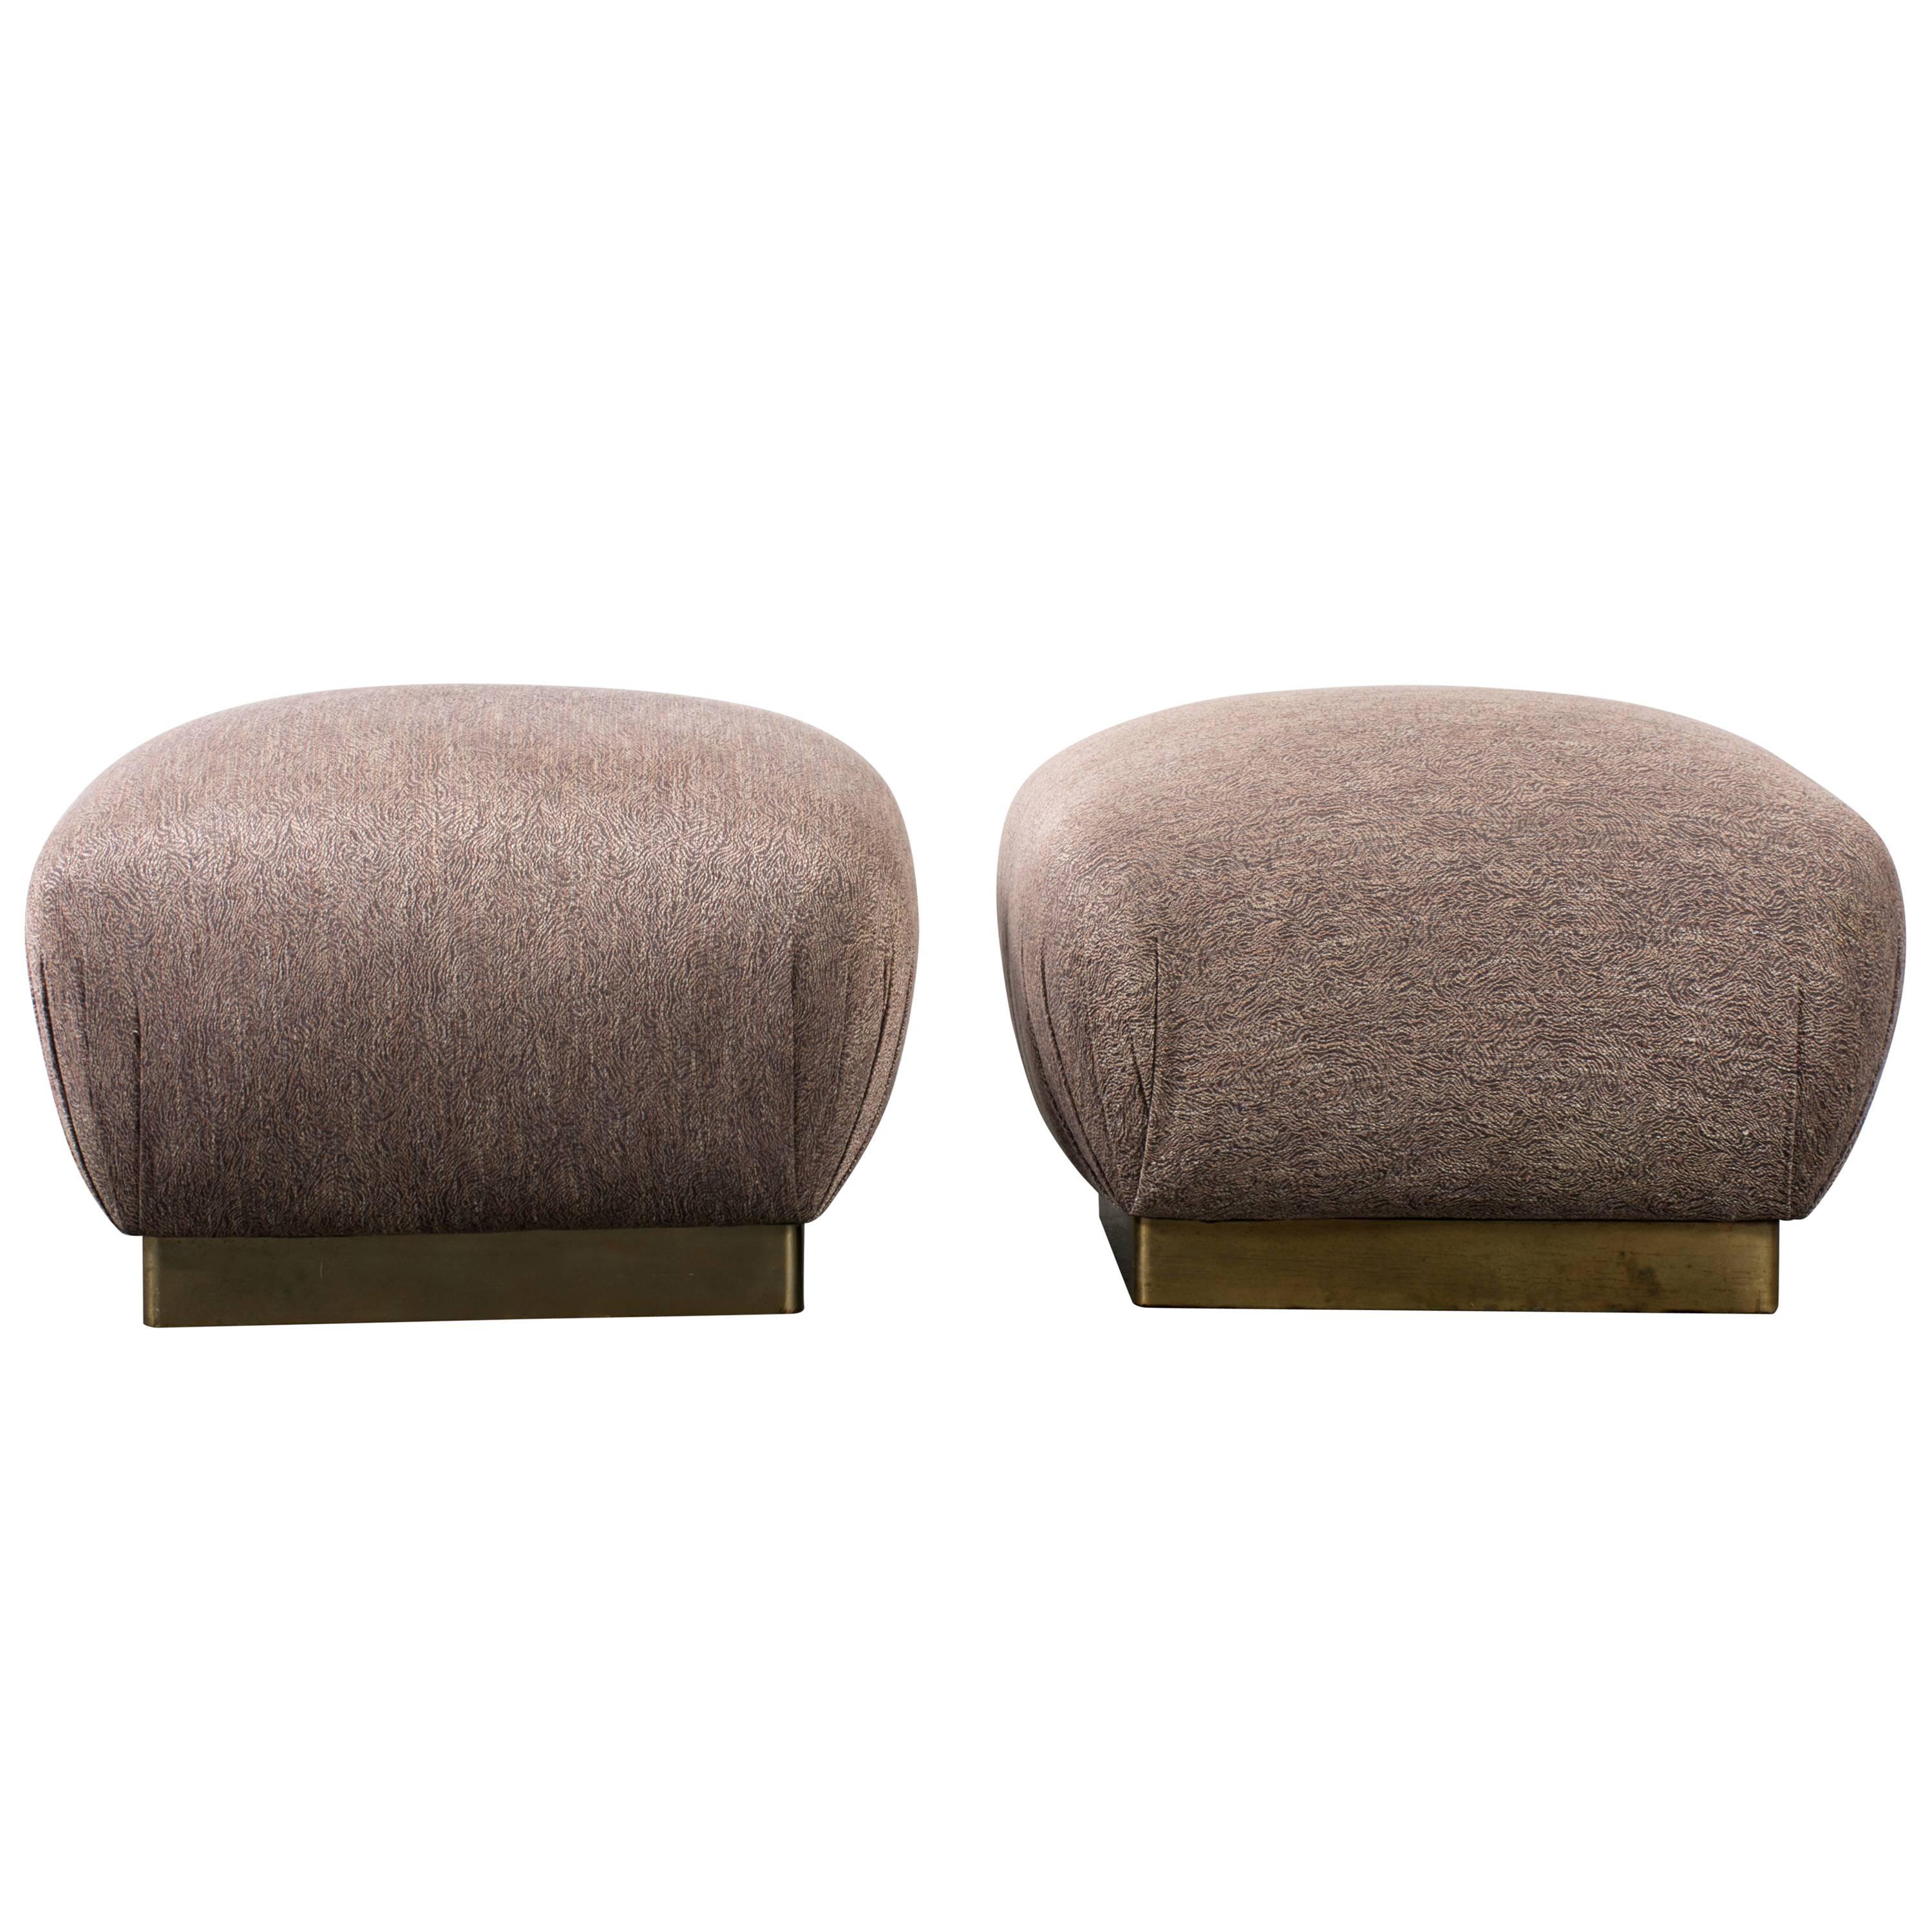 Pair of Vintage Poufs by Marge Carson